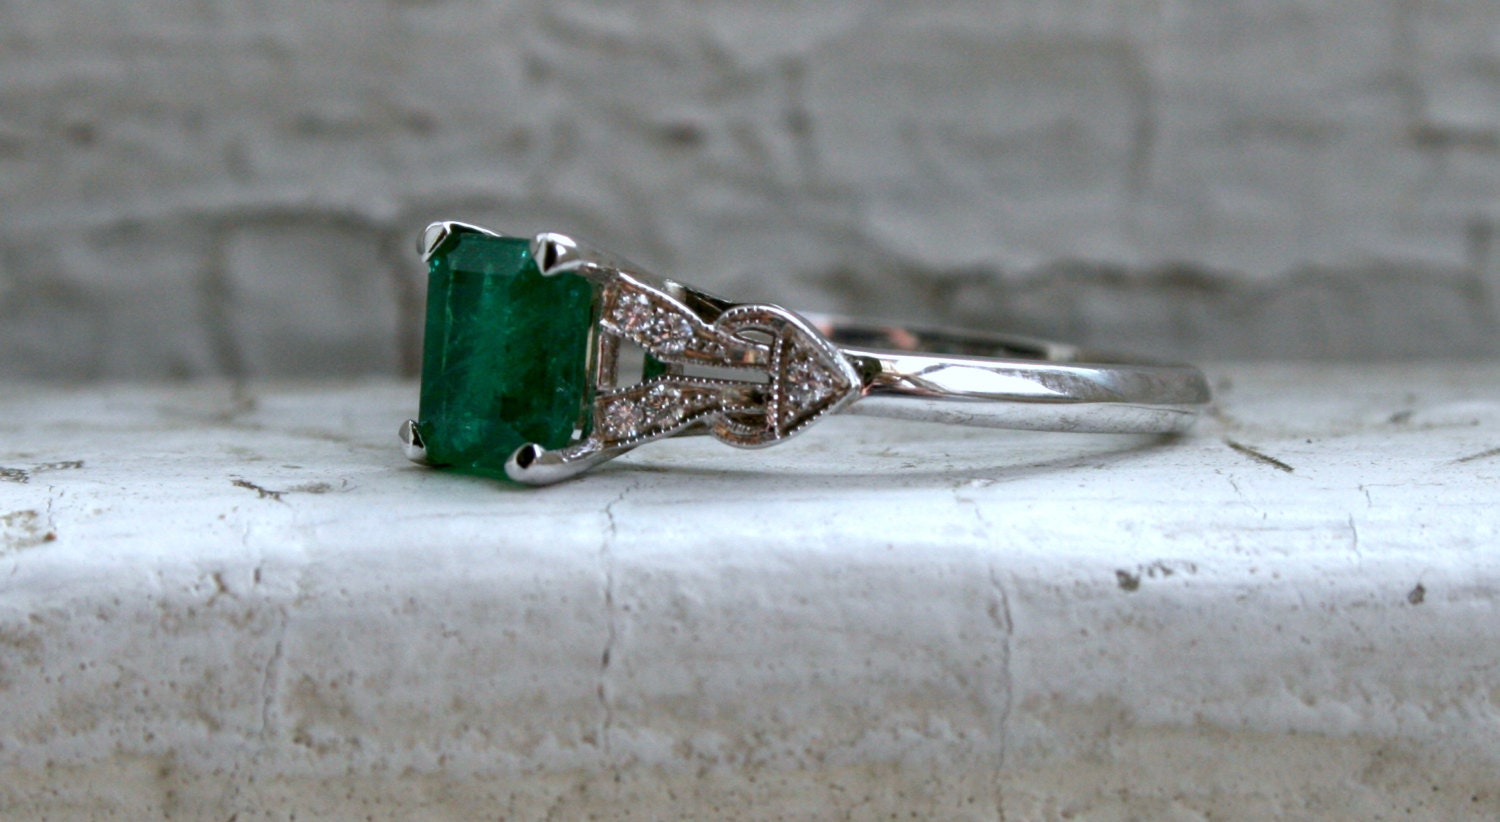 Vintage Inspired 18K White Gold Diamond and Emerald Engagement Ring Wedding Ring.